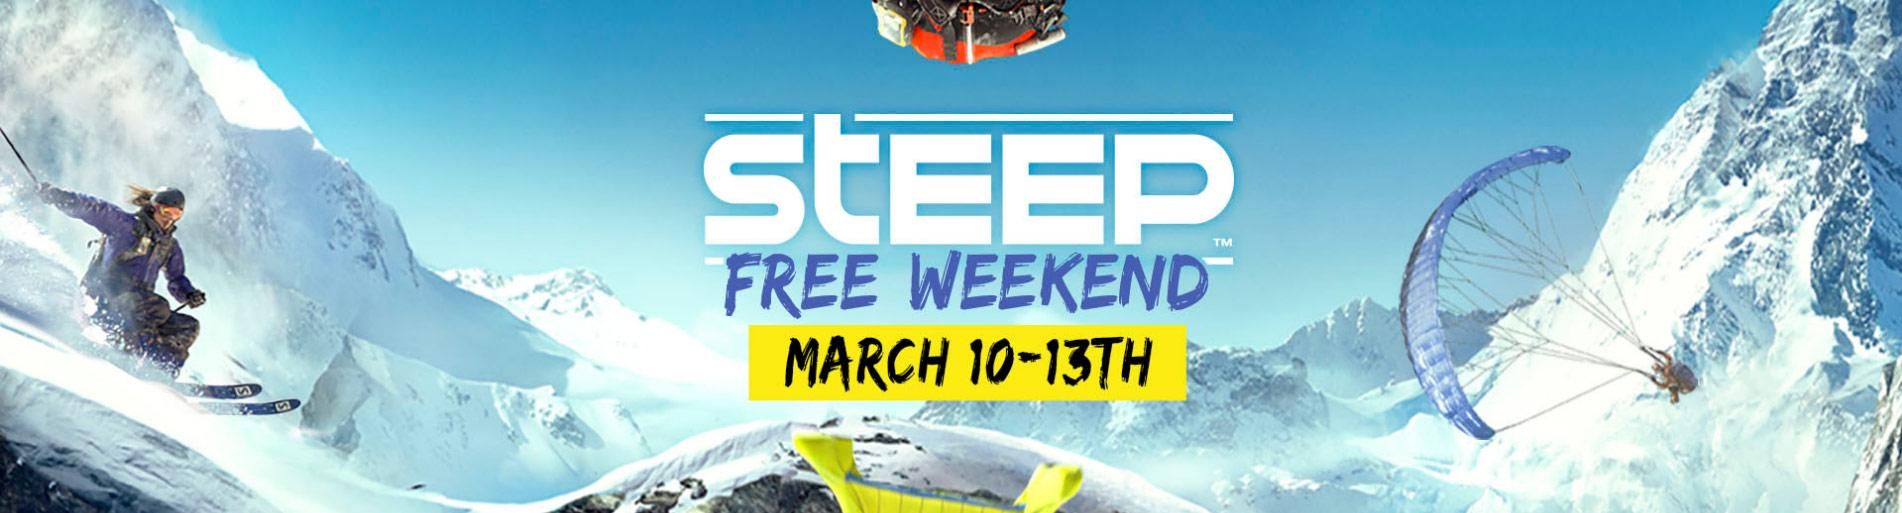 download the price is steep for free